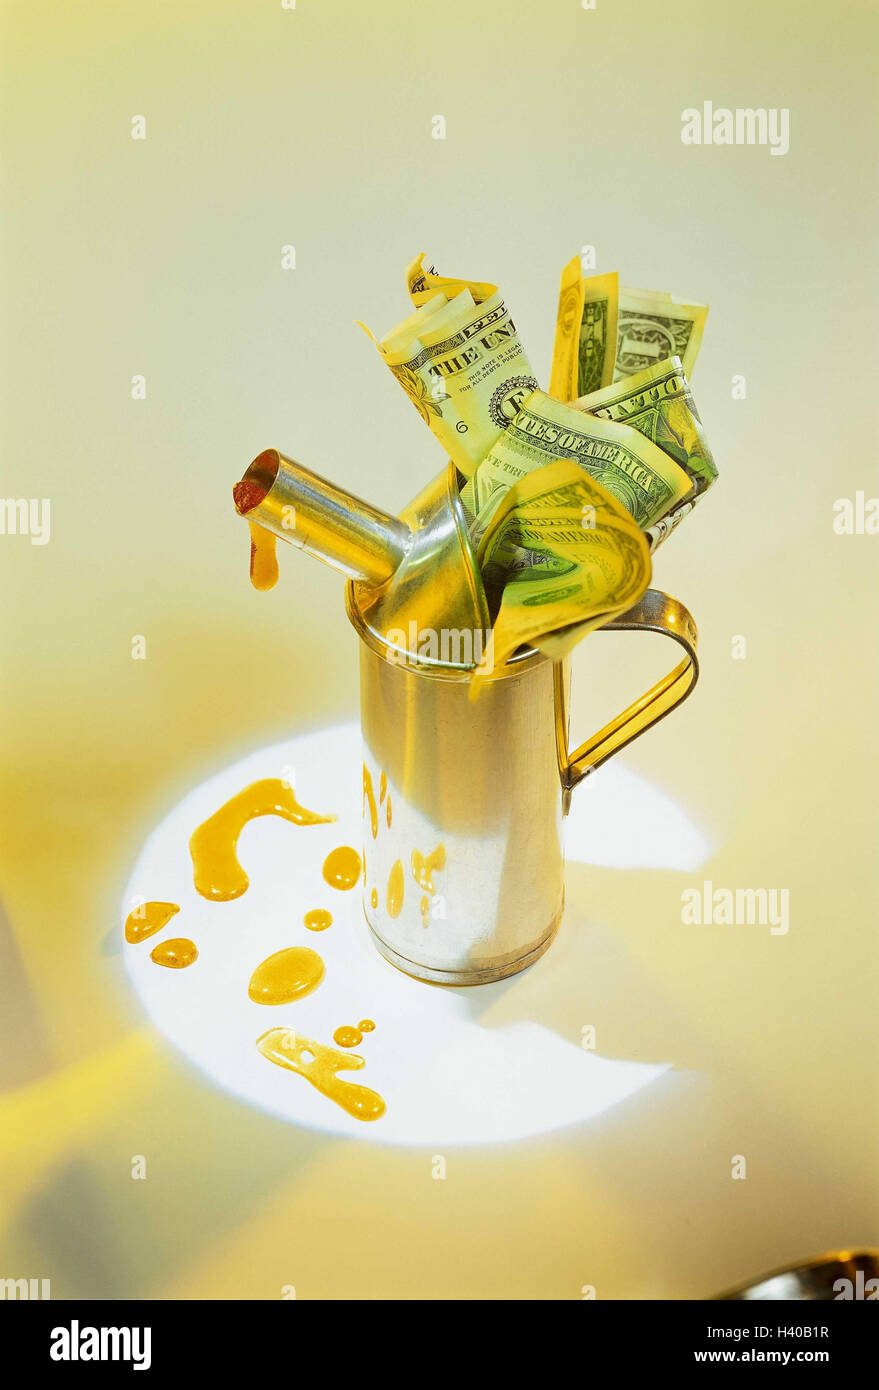 Icon, tax on oil, projection, oilcan, bank notes, dollar, oil, let drip heating expenses, petrol, pot, money, banknotes, Petrodollar, advertisement, drop, ecological tax, consumption tax, tax, yellow Stock Photo